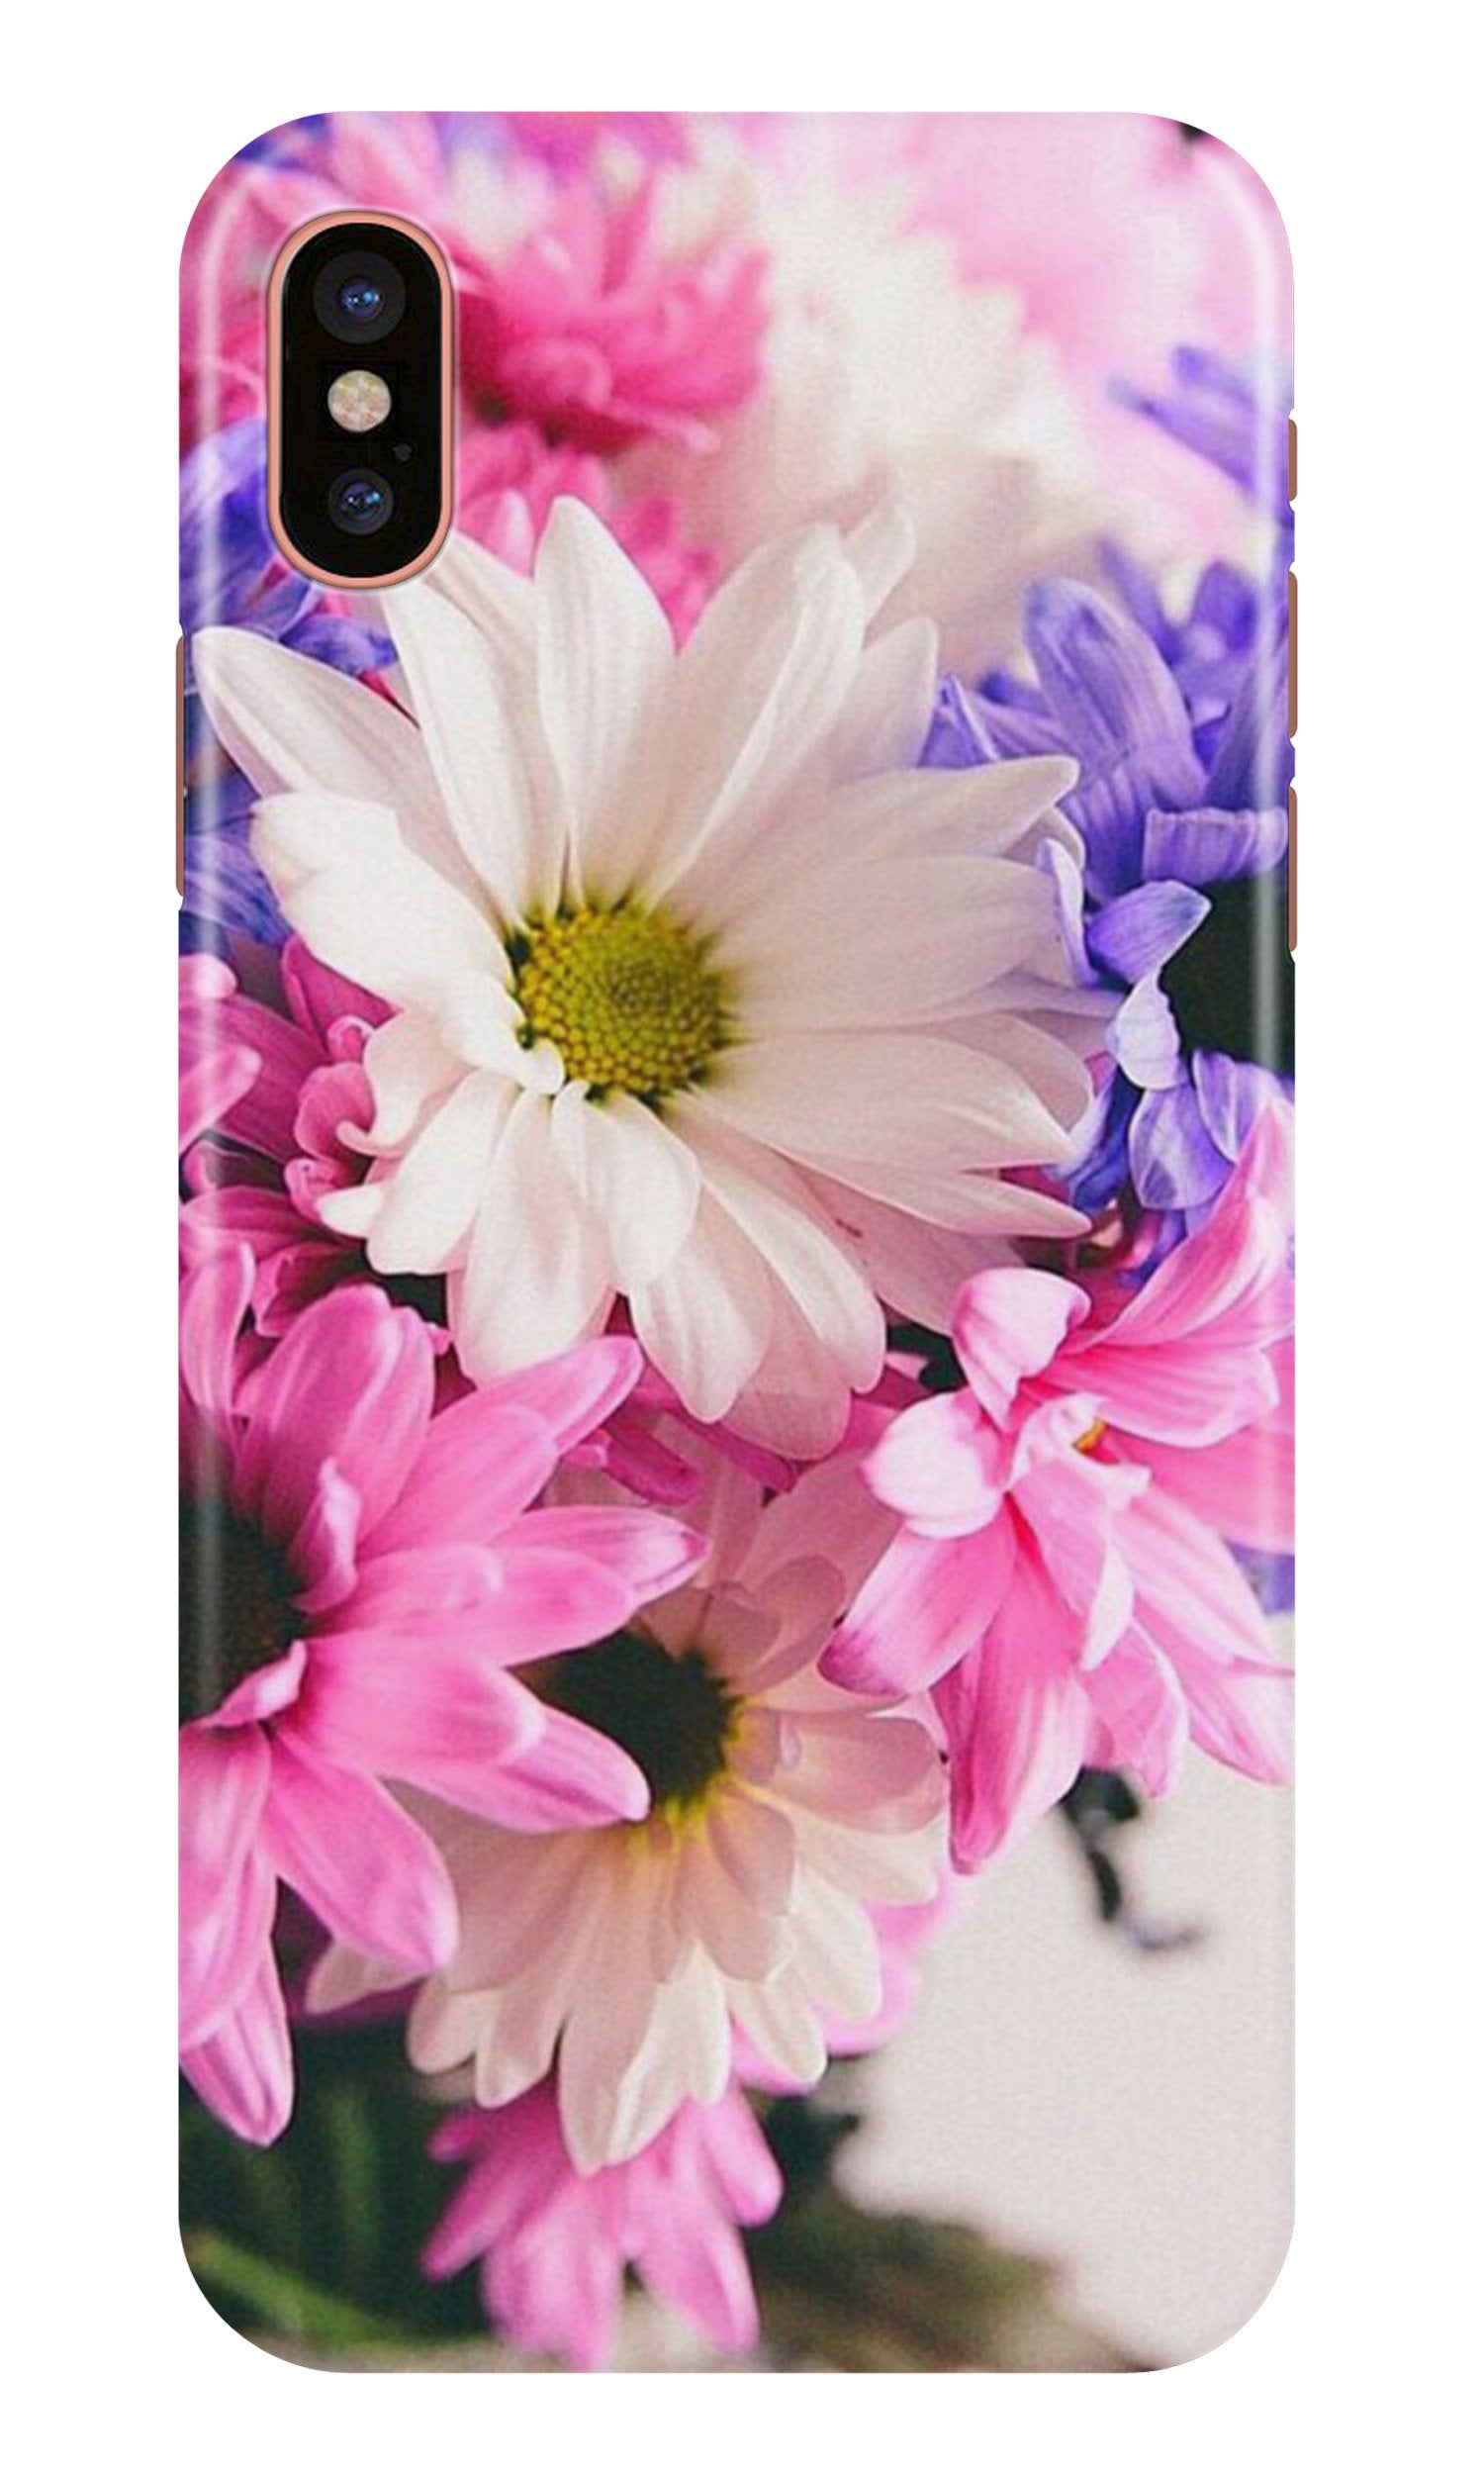 Coloful Daisy Case for iPhone X